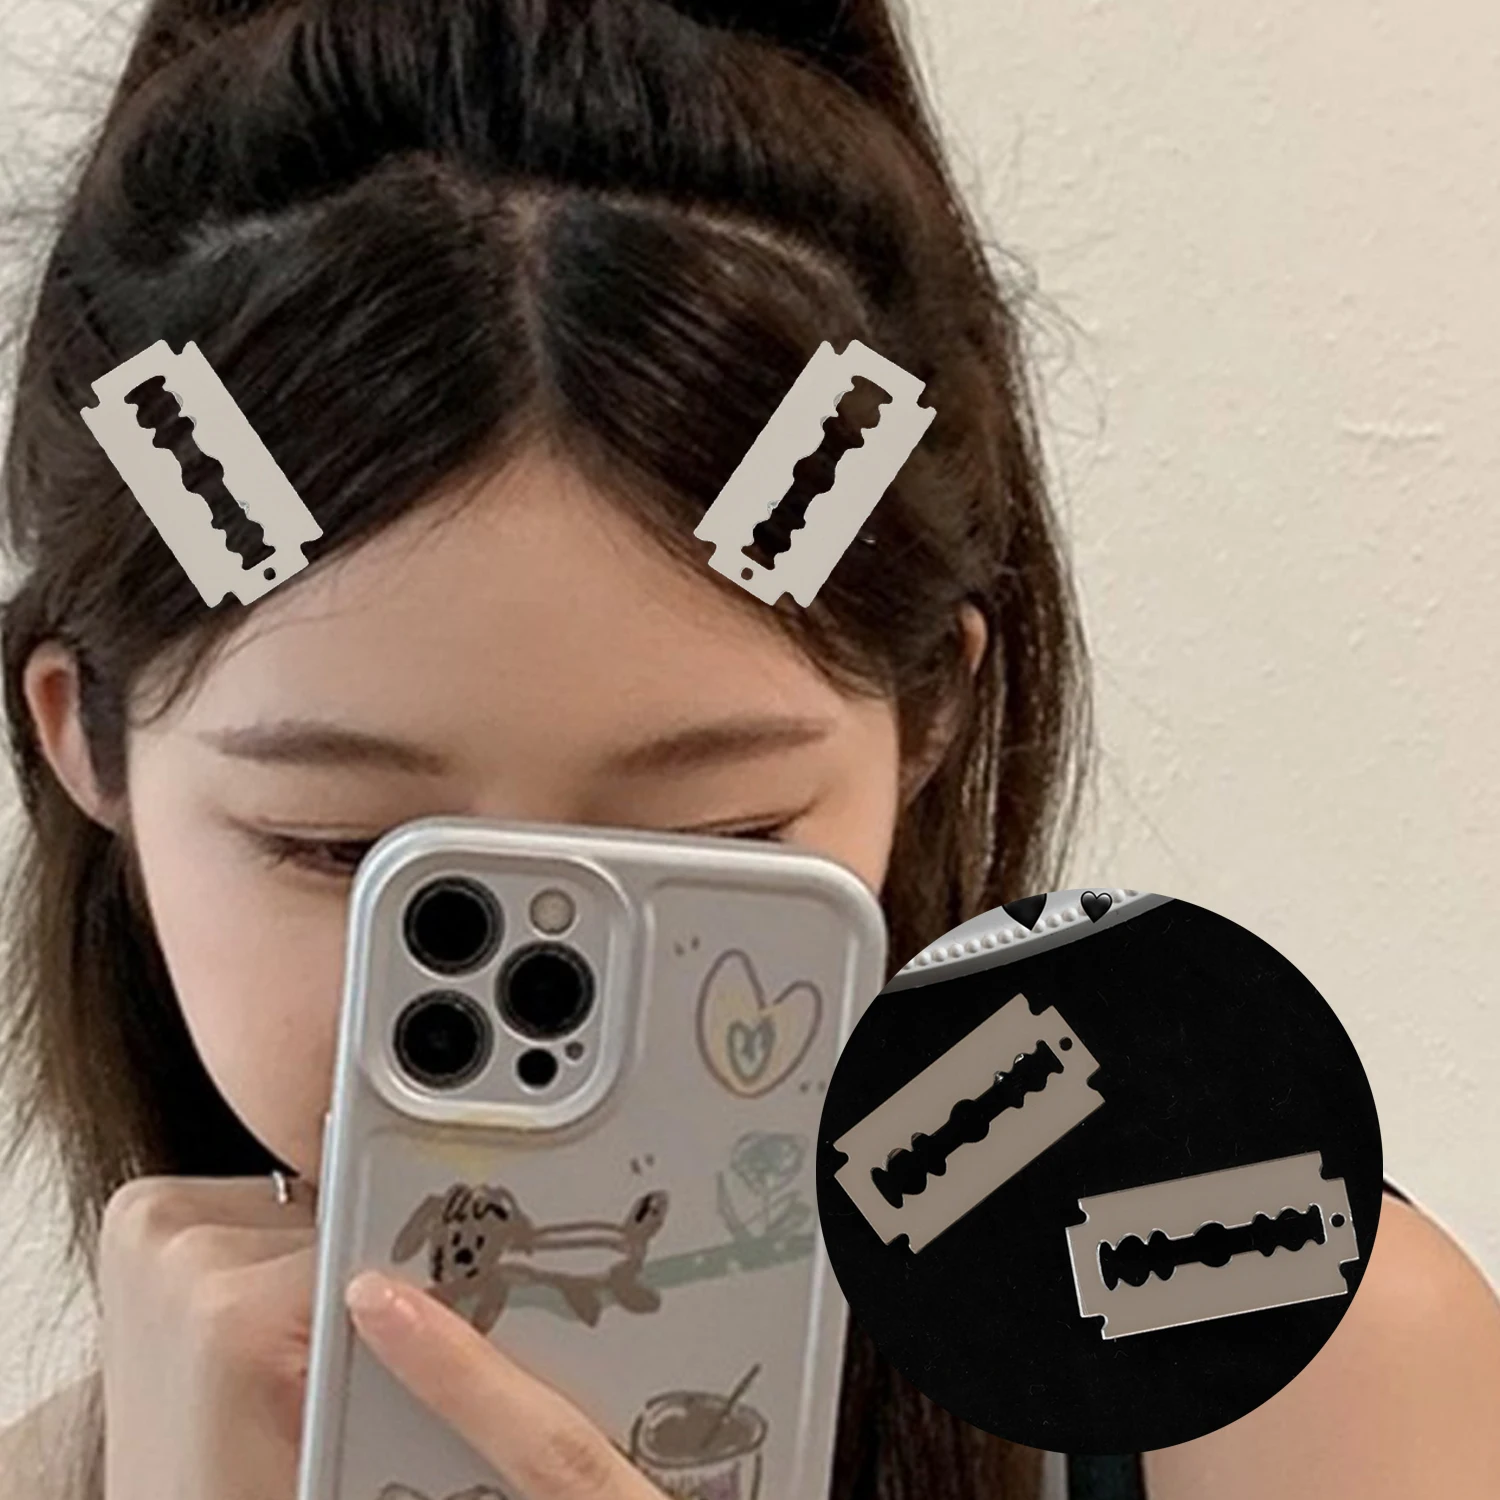 Lovely Simulated Blade Mini Hair Clip For Girls Headwear Fashion Light Luxury Women Creative Acrylic Hairpins Hair Accessories custom 2022 acrylic badge lanyards flashing id badge up reusable led car door light for saab customize your own logo polyester